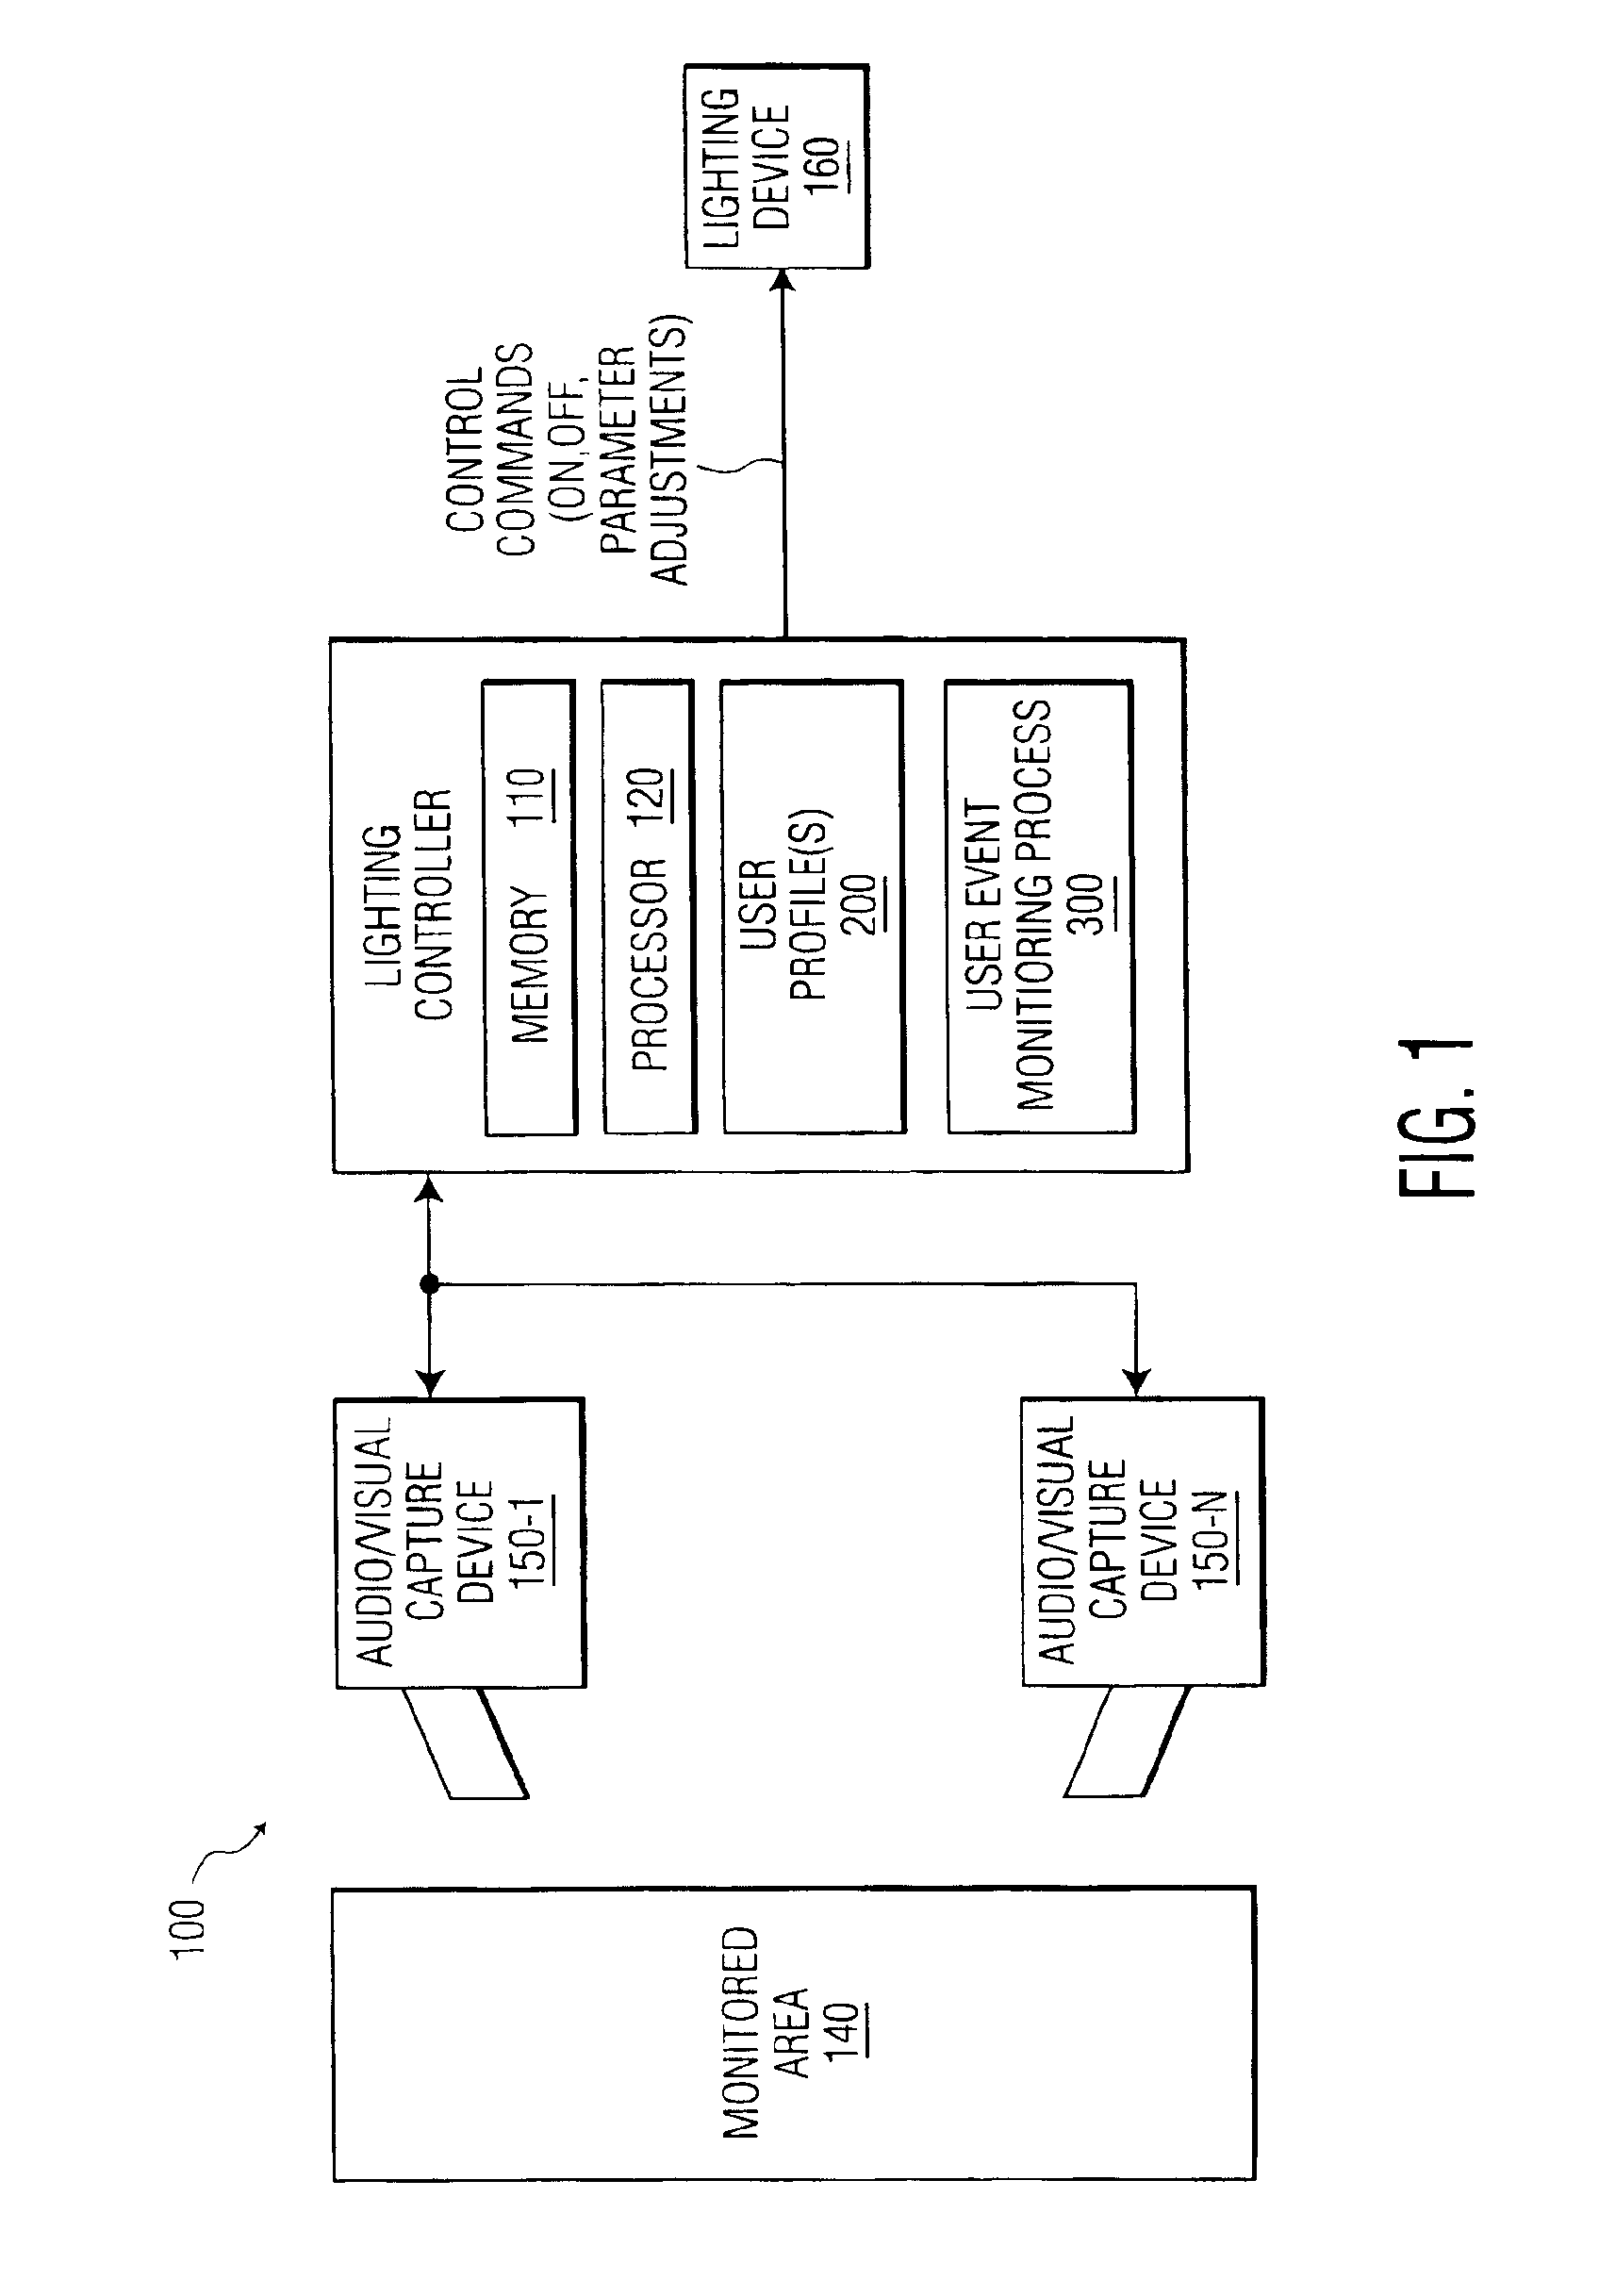 Method and apparatus for controlling lighting based on user behavior